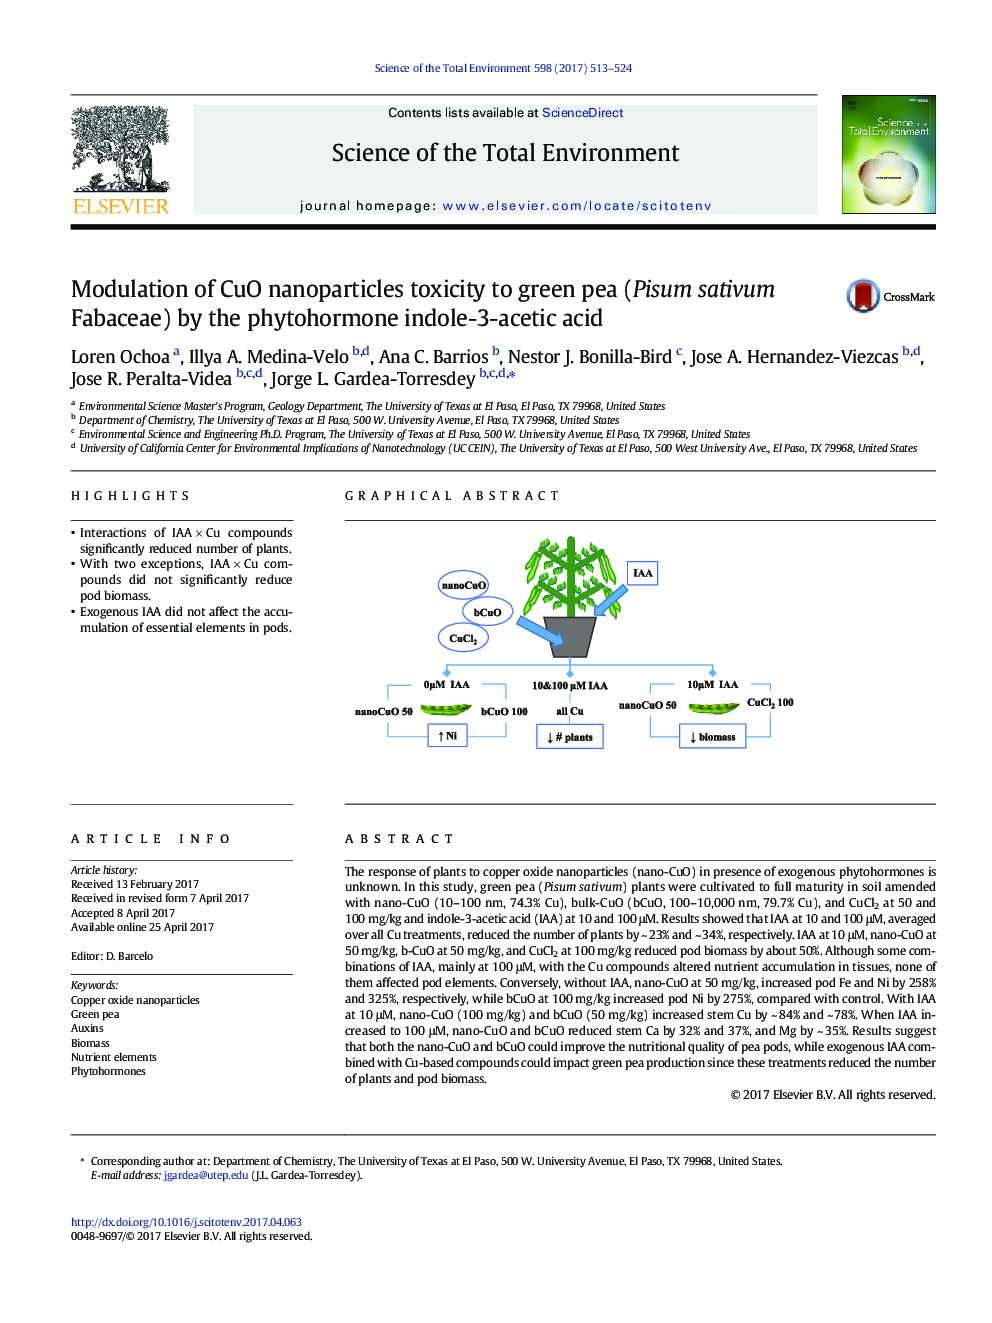 Modulation of CuO nanoparticles toxicity to green pea (Pisum sativum Fabaceae) by the phytohormone indole-3-acetic acid